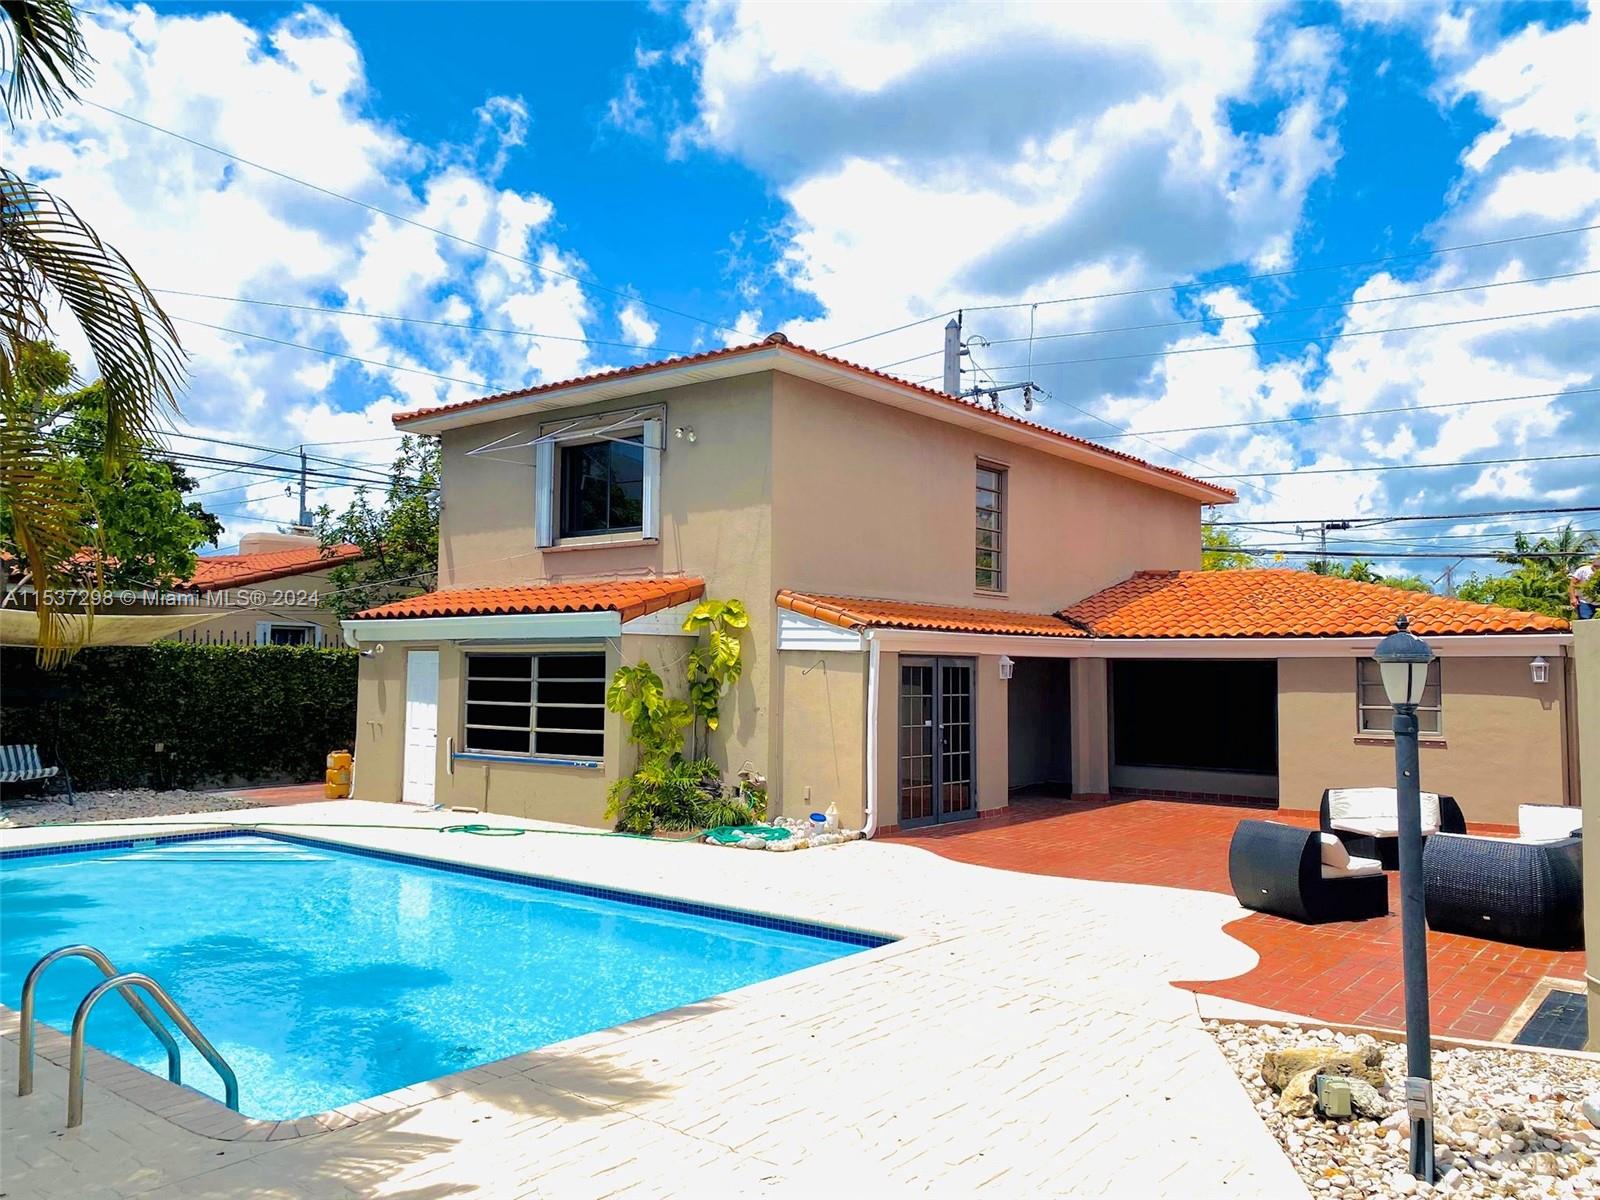 This Spectacular large Pool Home has character and is ready to move in, large back yard great for entertaining. Location nestled between Brickell and Key Biscayne sits this grand 3 bedrooms 3 Bath home, a spacious gem